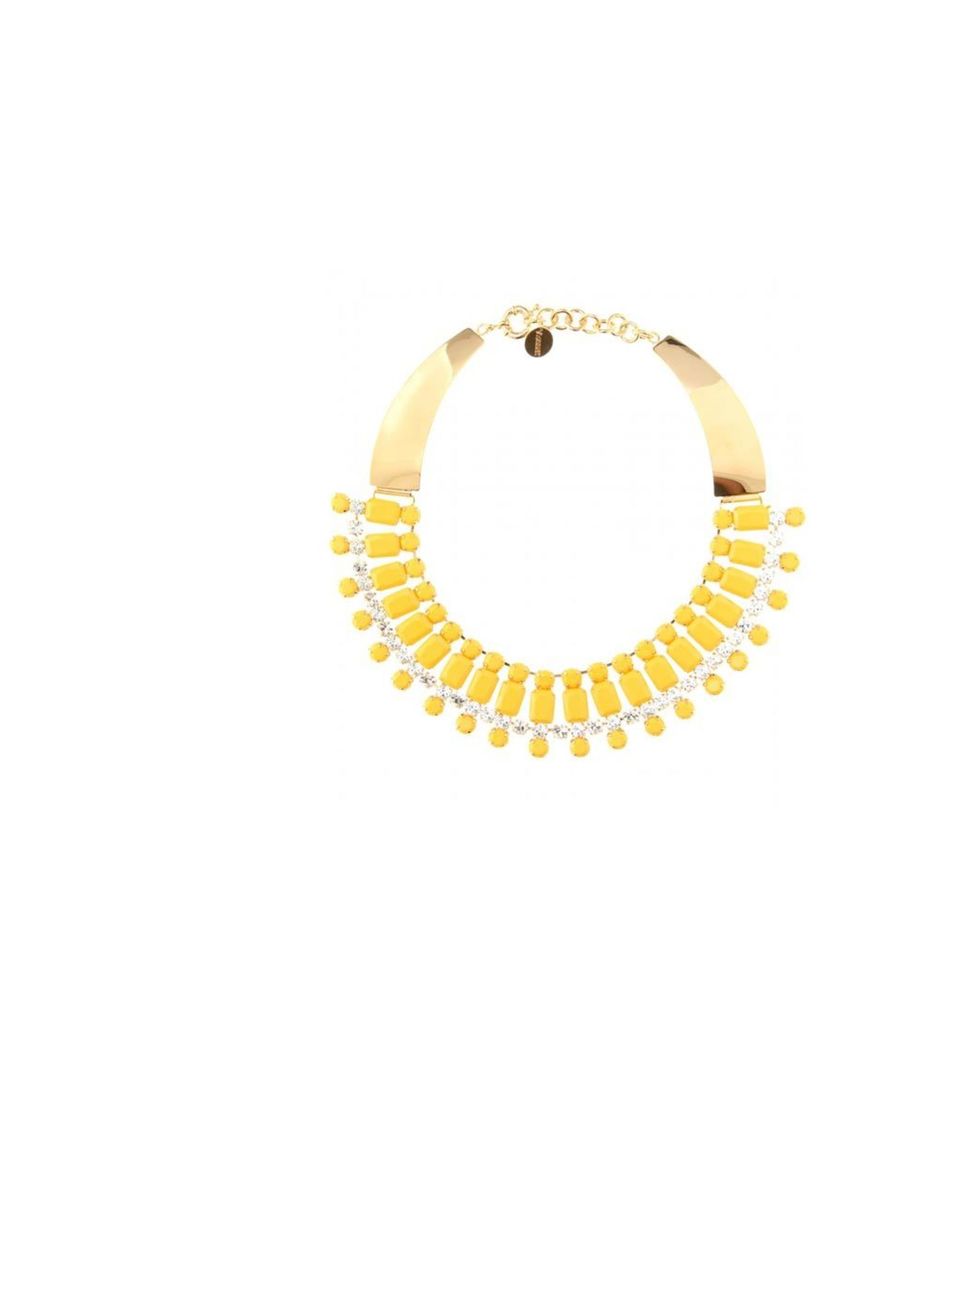 <p>Vionnet tiered necklace with Swarovski crystals, £477, at <a href="http://www.mytheresa.com/uk_en/tiered-necklace-with-swarovski-crystals-142545.html">mytheresa.com</a></p>